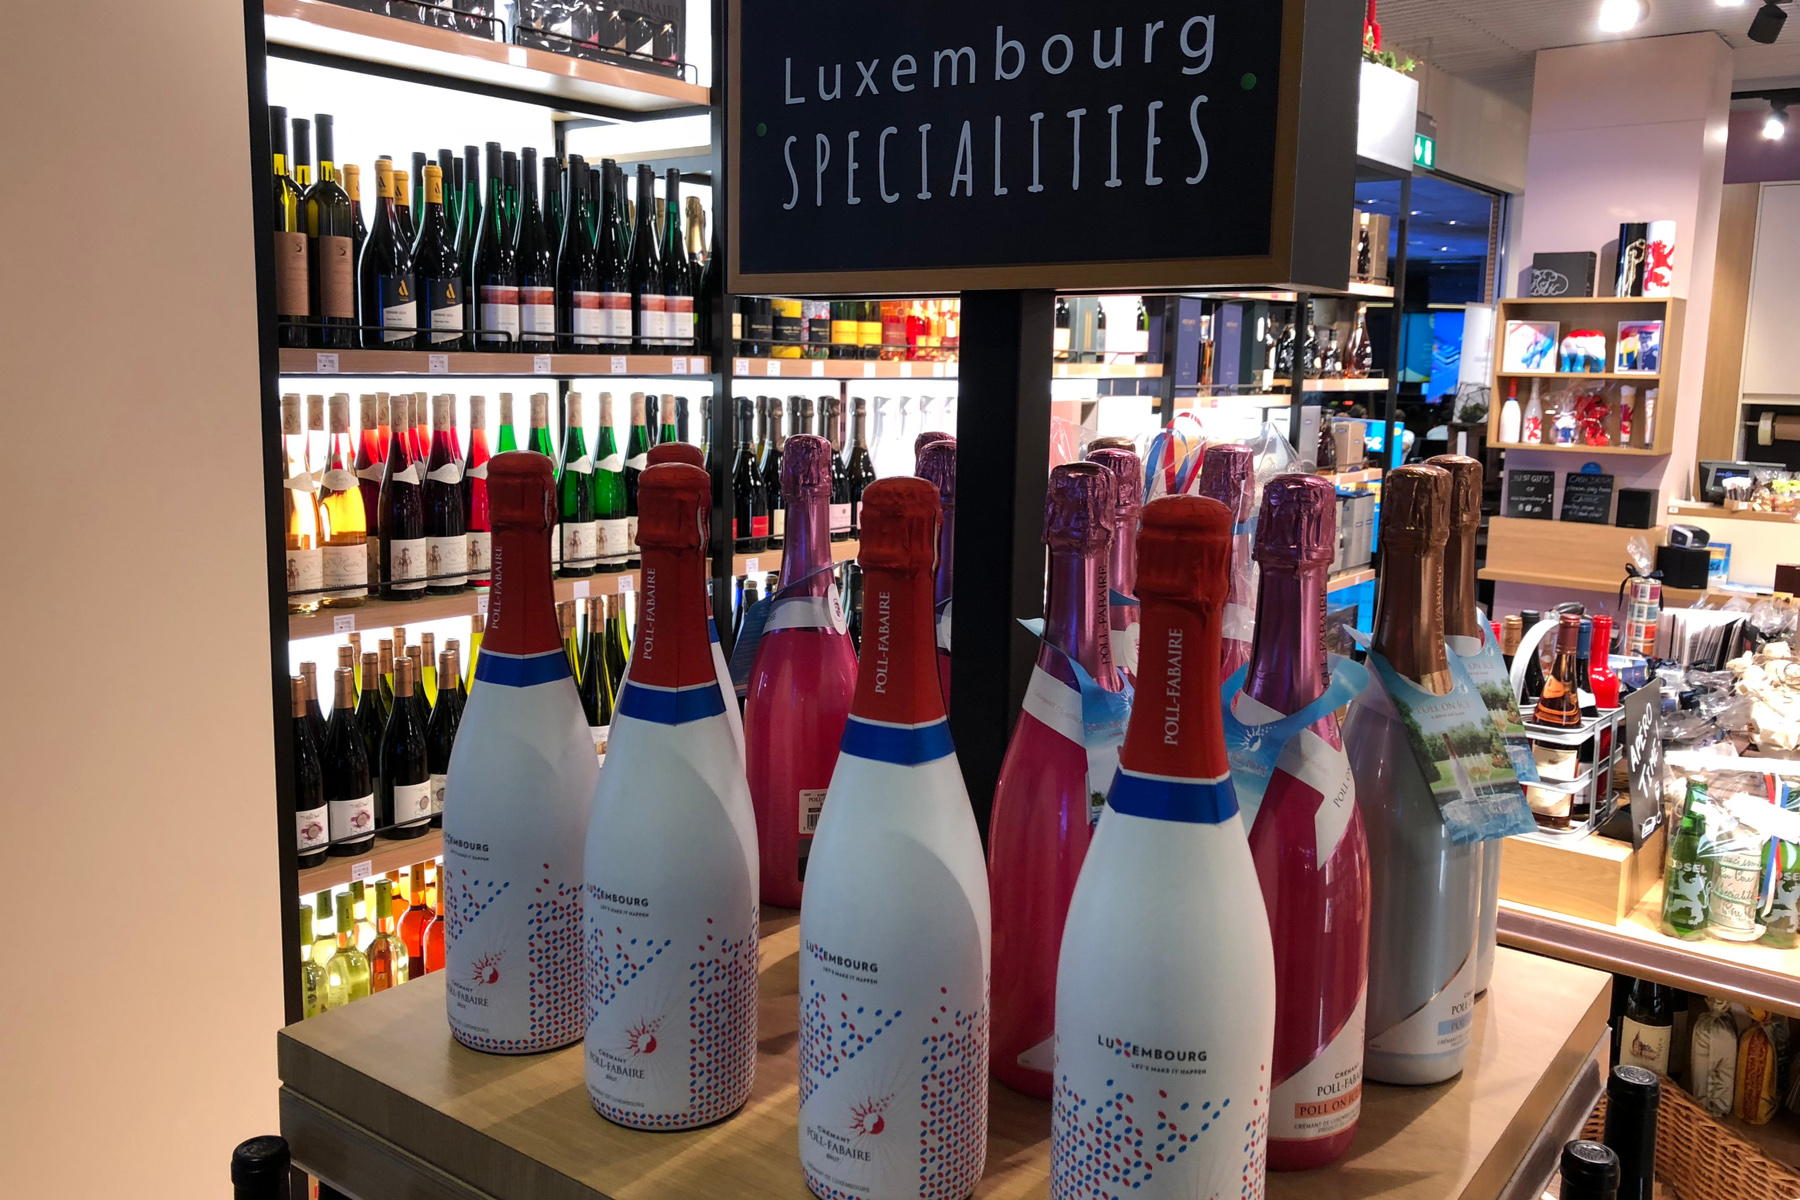 Sparkling wine from Luxembourg